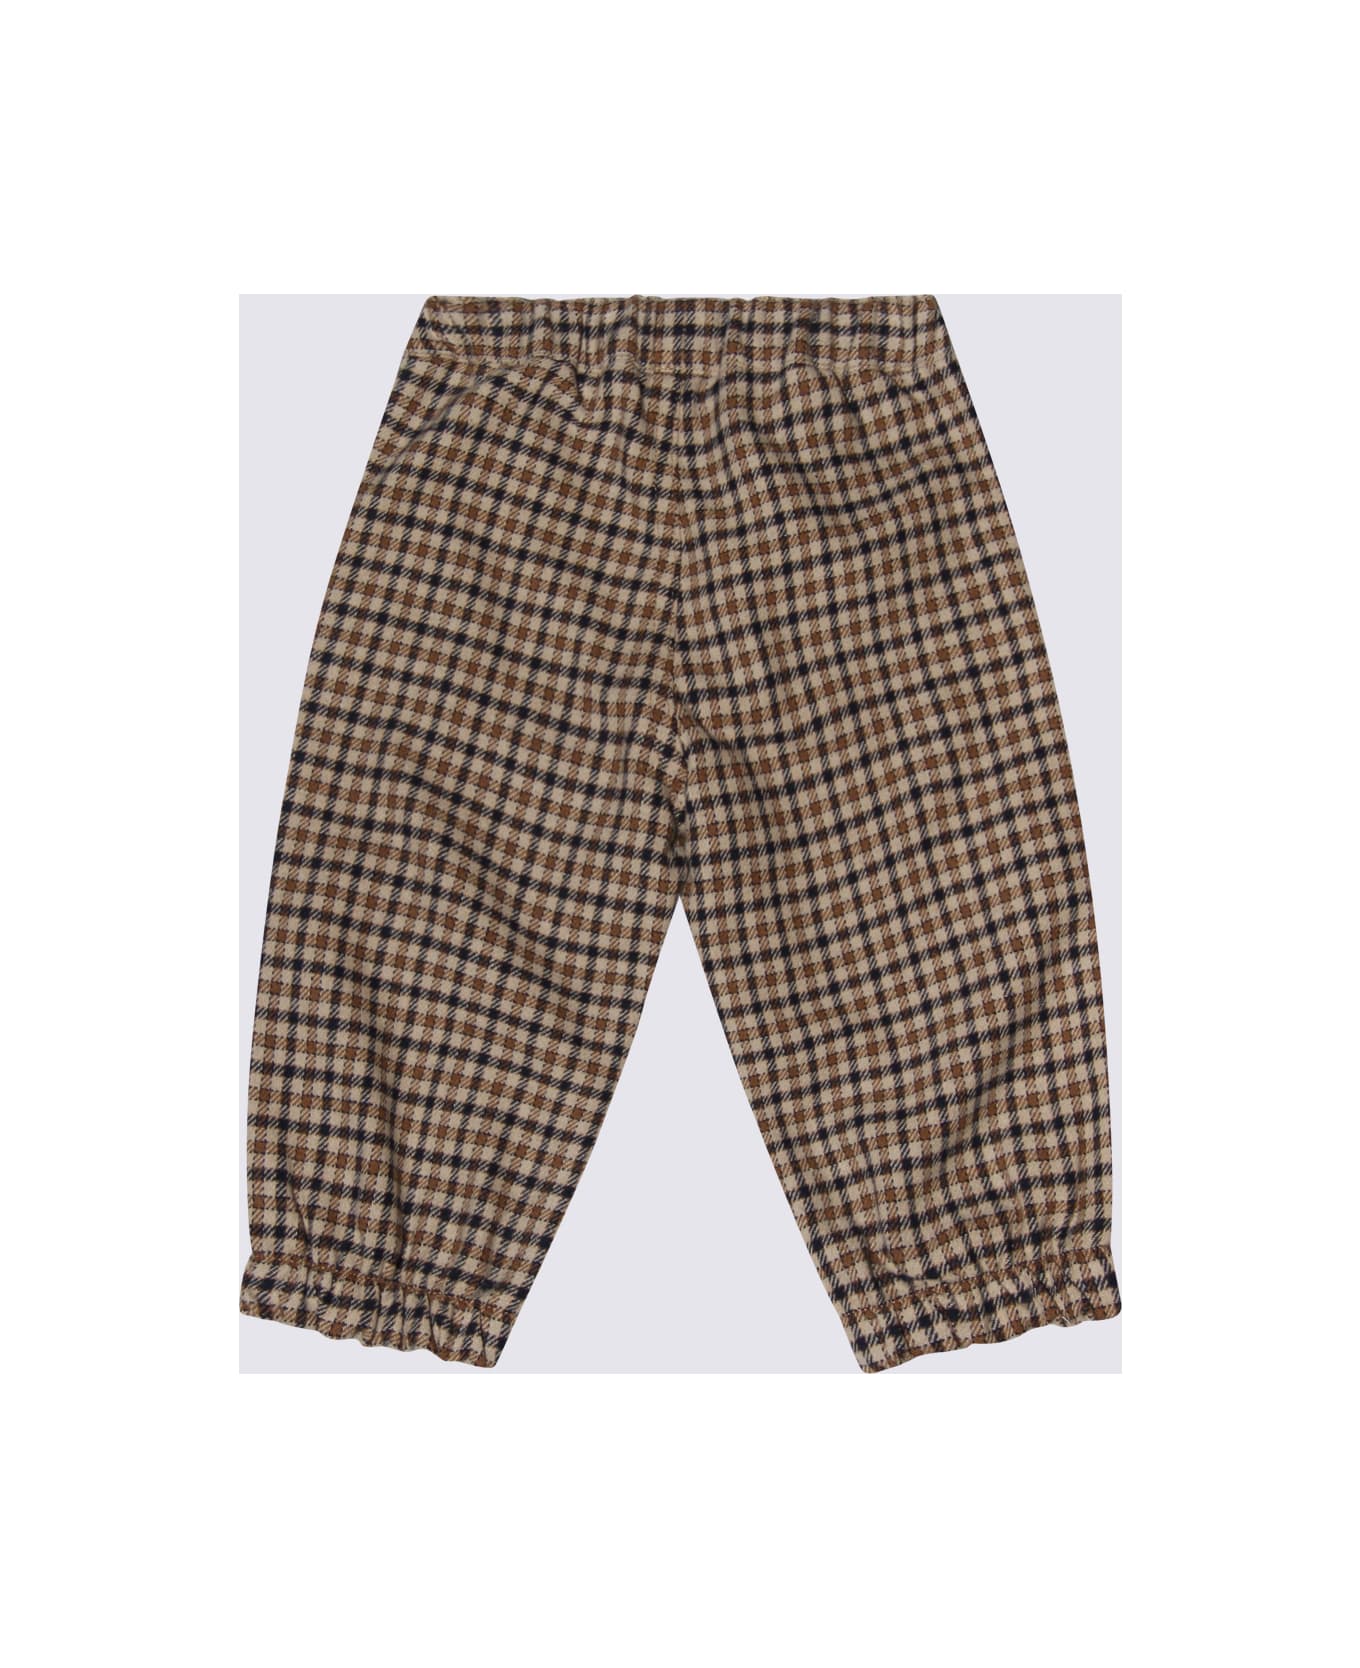 Il Gufo Blue And Beige Cotton Blend Check Pants - Blue ボトムス